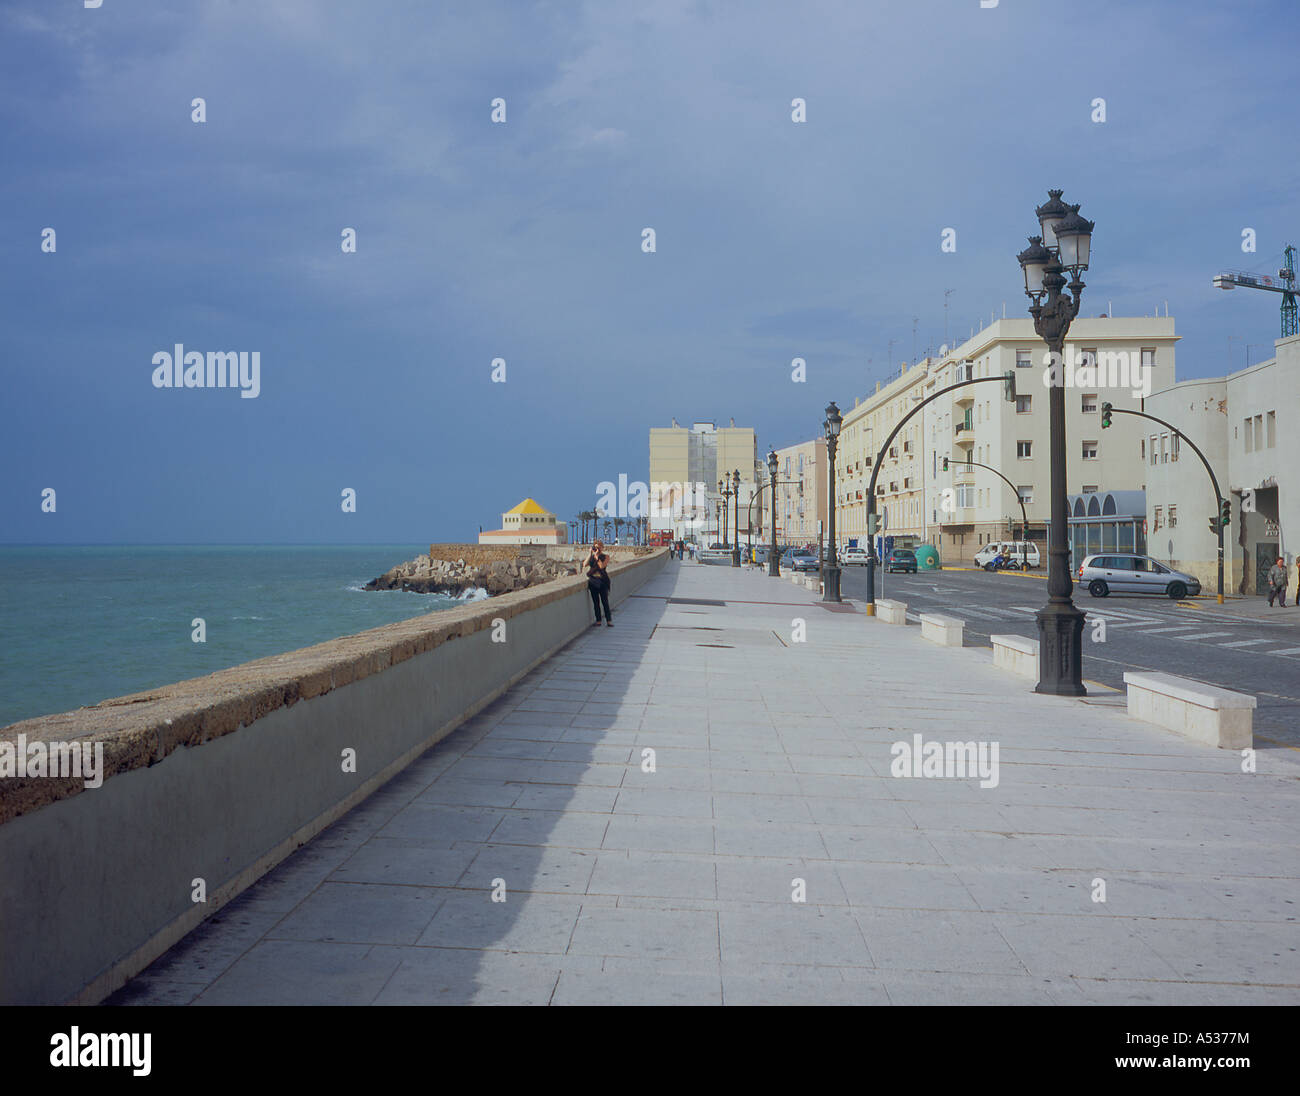 city of Cadiz, Andalusia, Spain Europe. Photo by Willy Matheisl Stock Photo